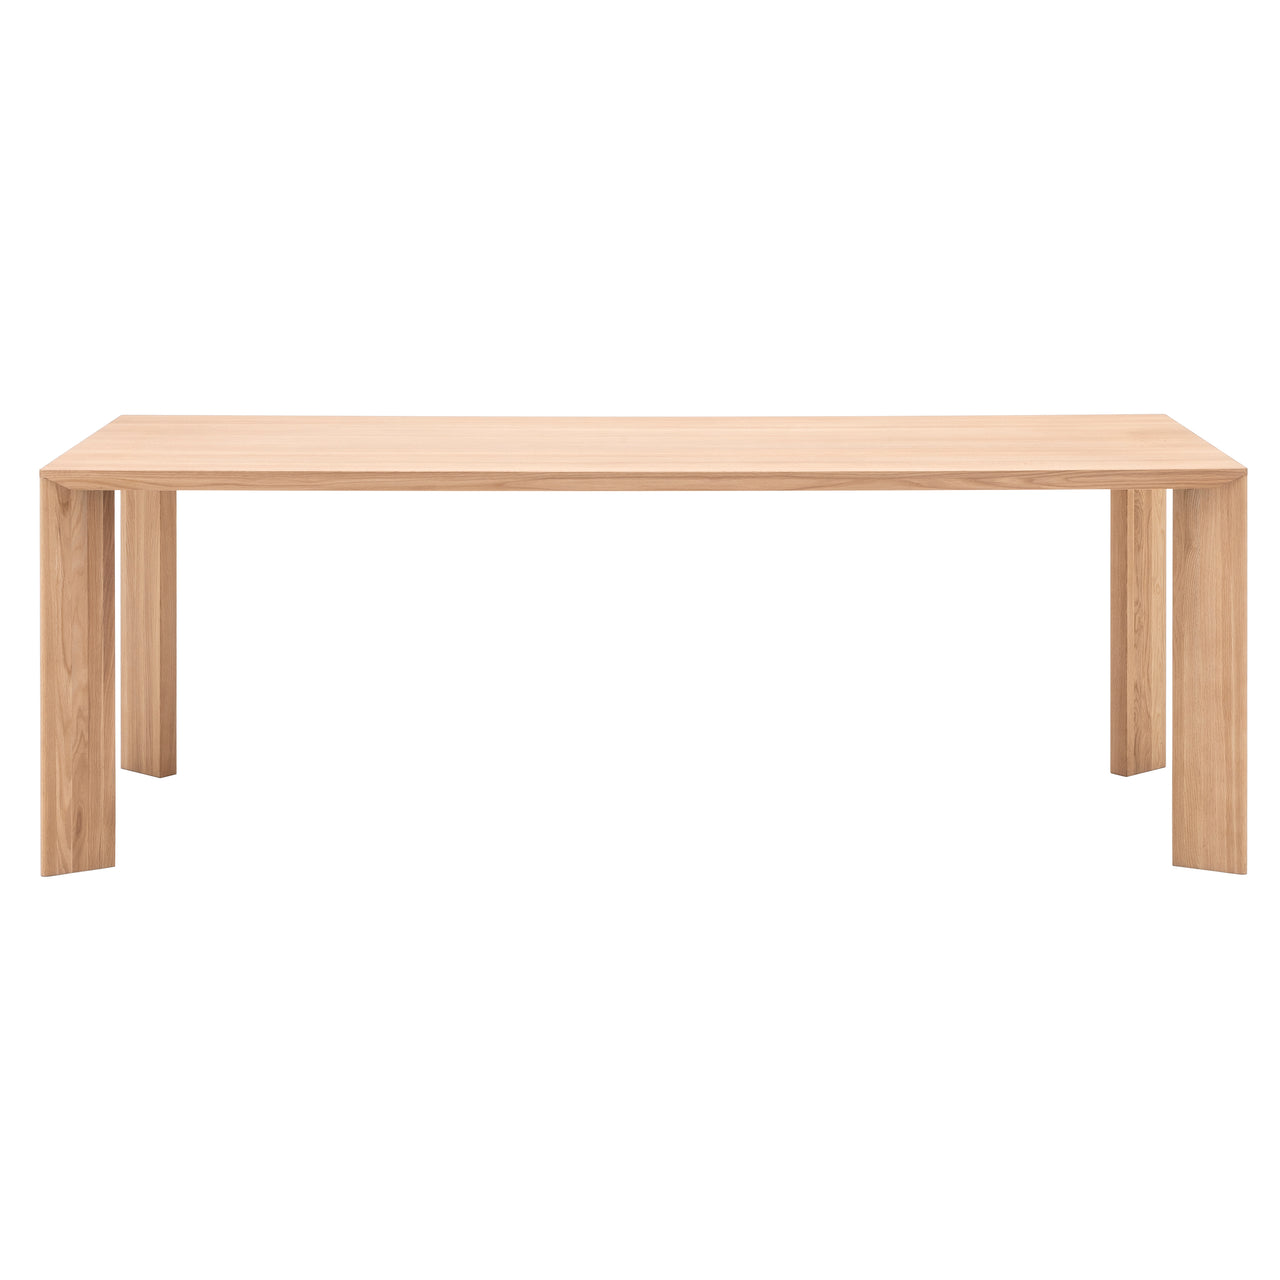 Azabu Residence Dining Table A-DT02: Extra Large - 86.6